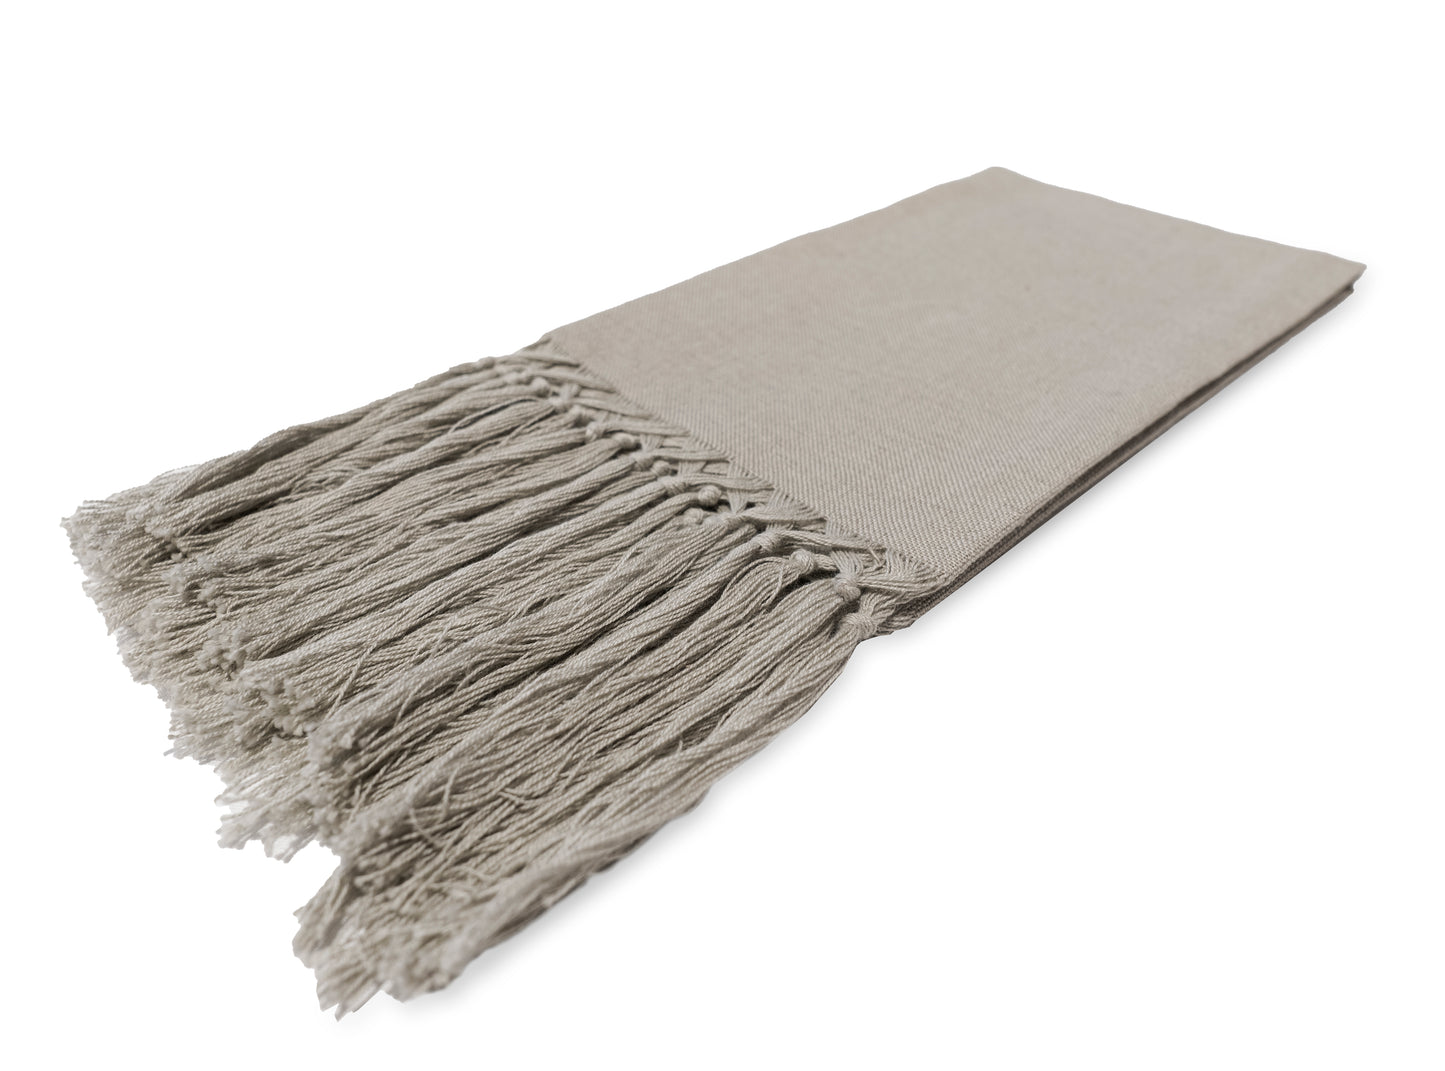 Fringed and Weaved Towels